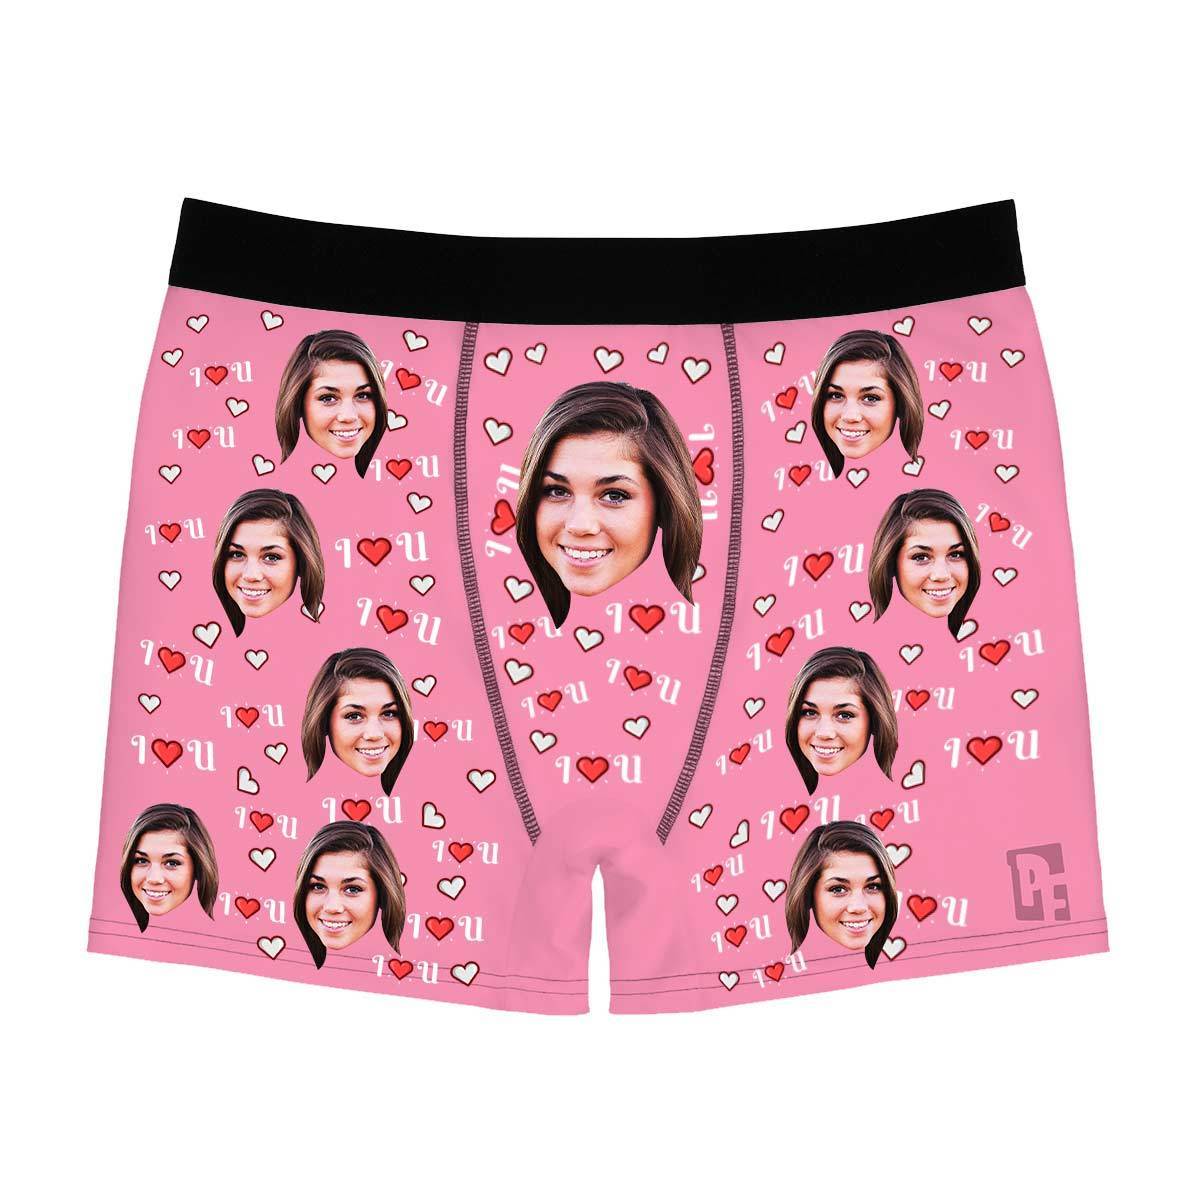 Pink I <3 You men's boxer briefs personalized with photo printed on them